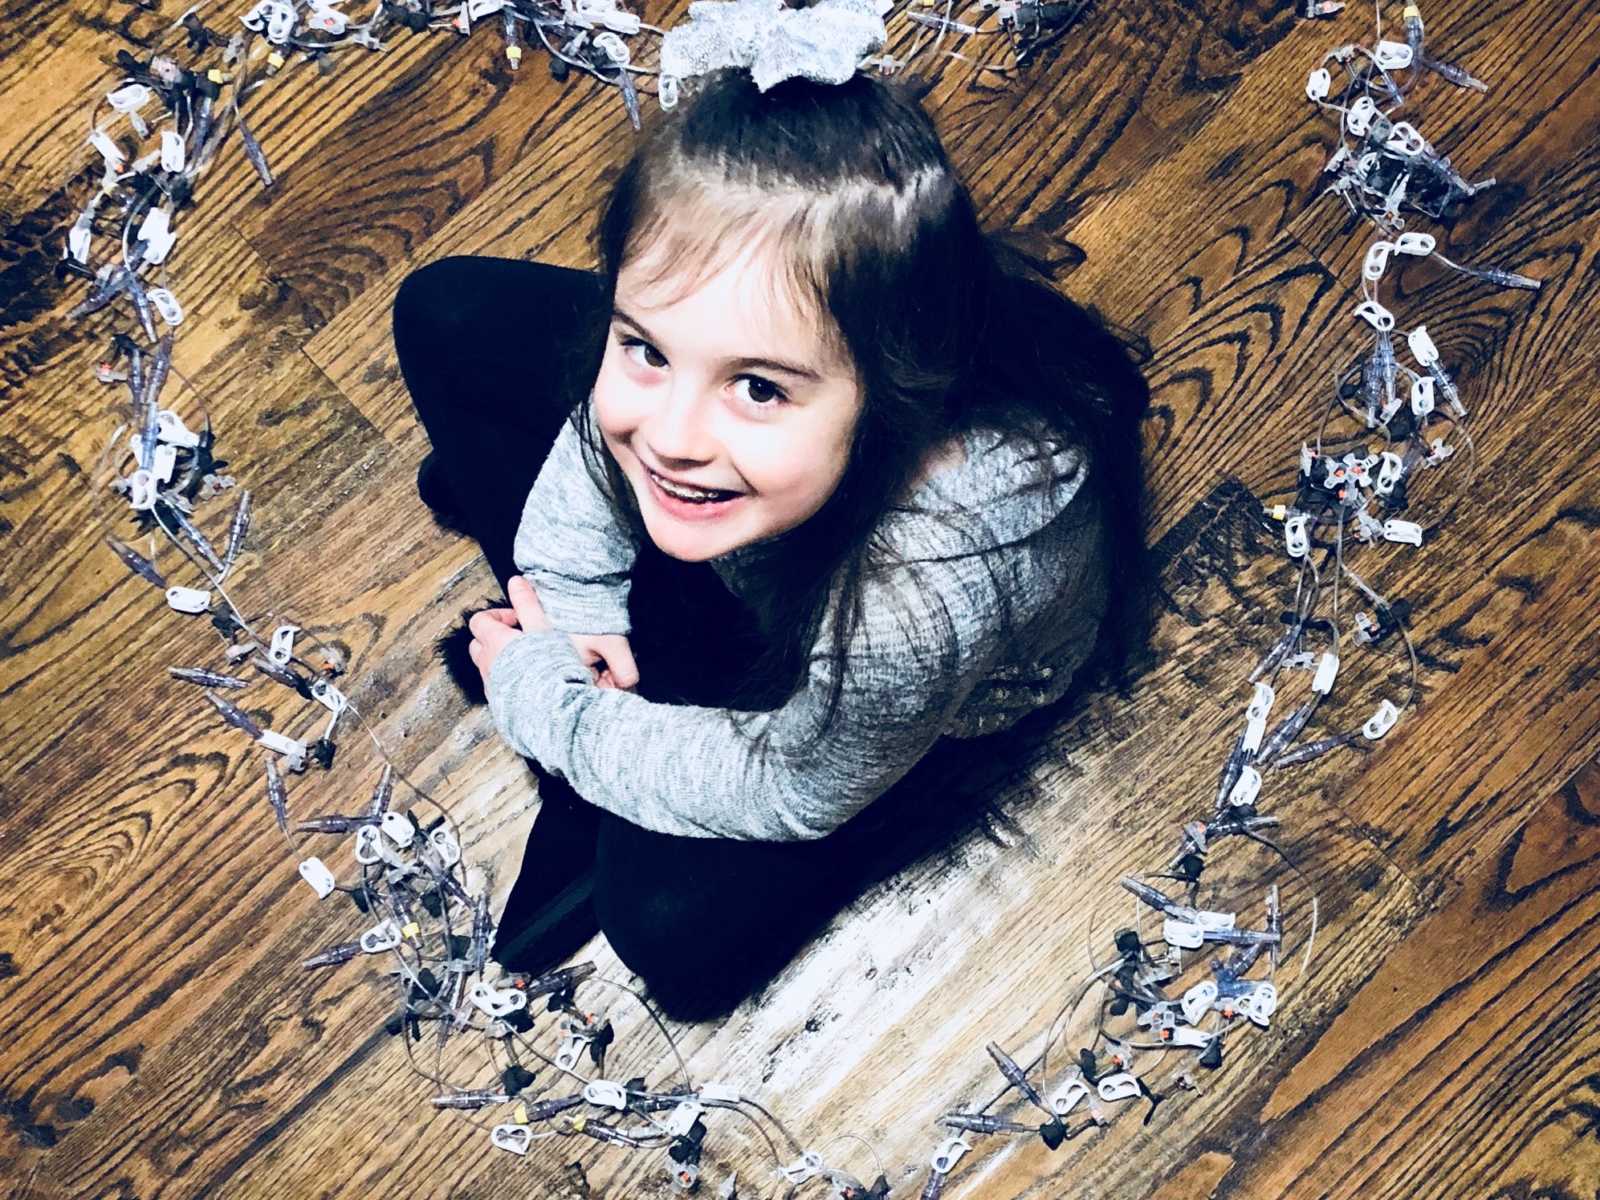 Little girl with rare disease looks up smiling while surrounded by needs in heart shape